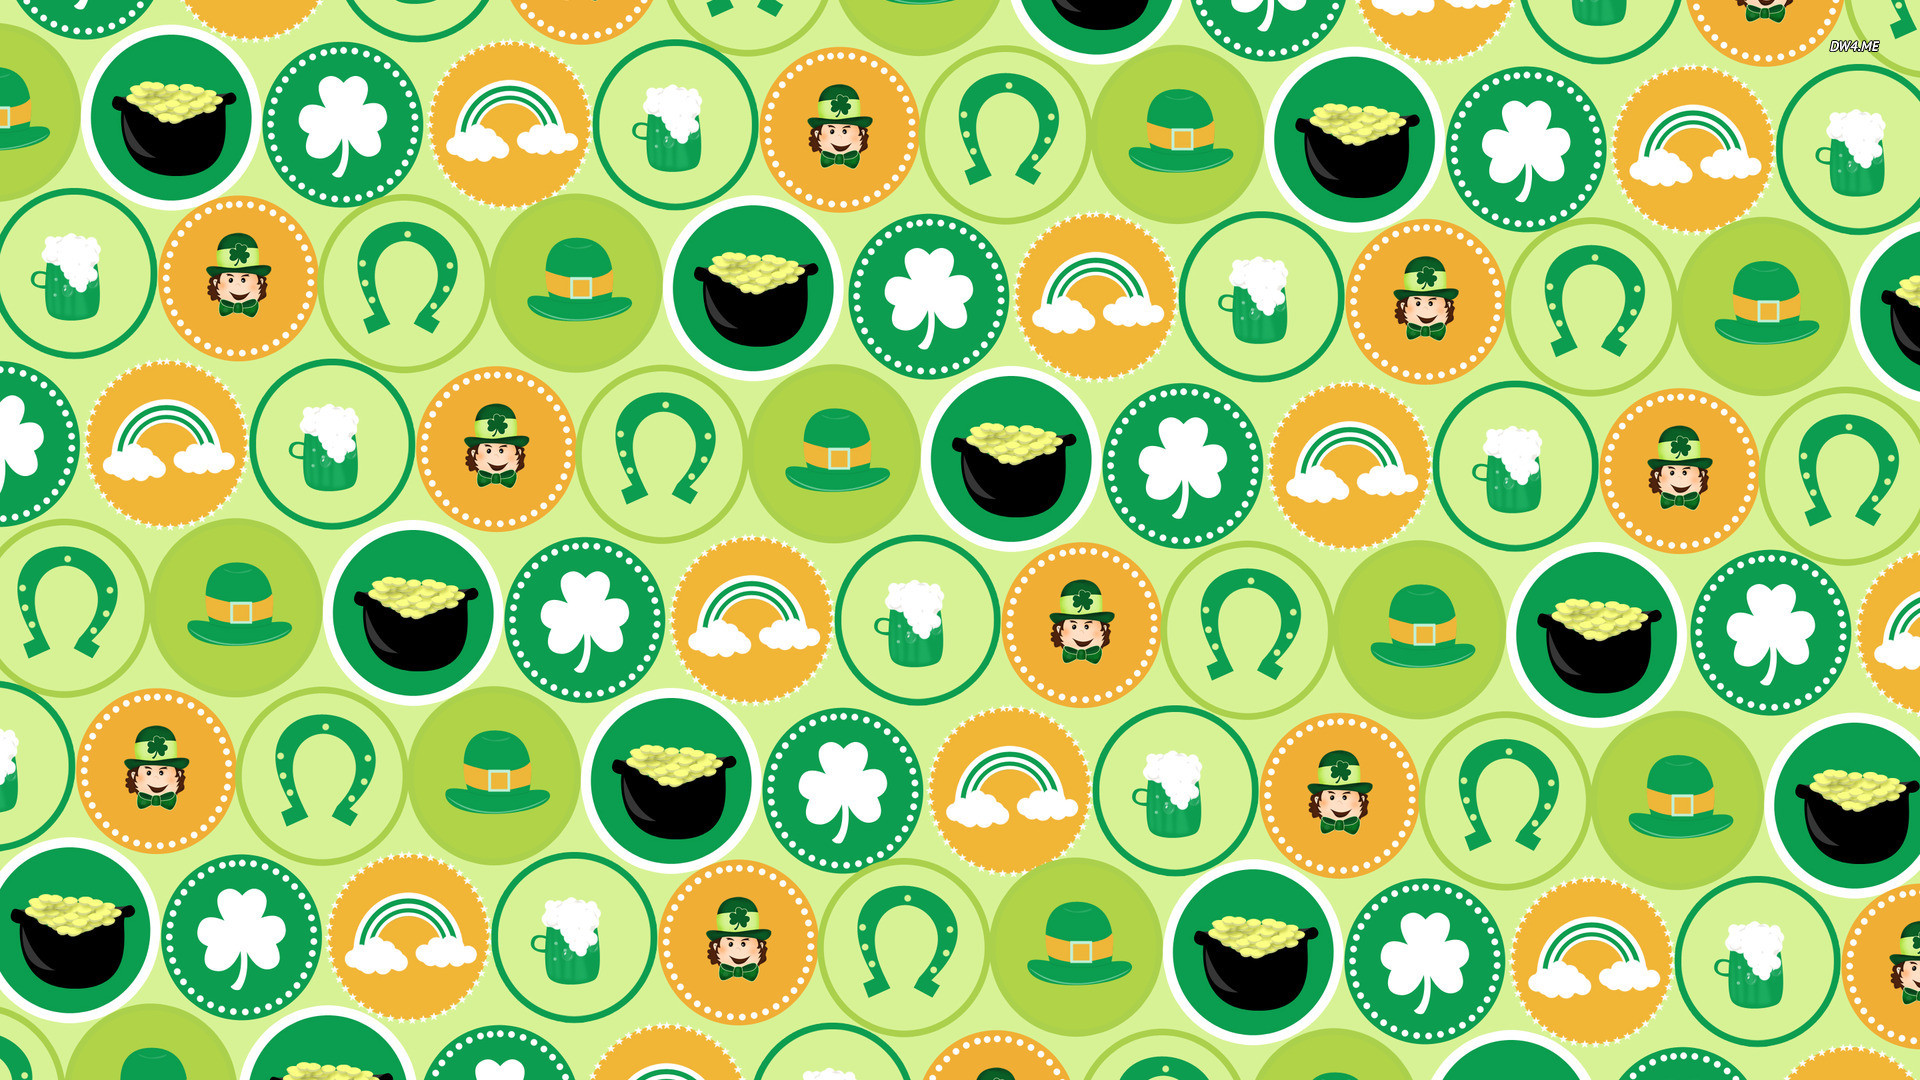 1920x1080 The 25+ best St patricks day wallpaper ideas on Pinterest | St patrick's day  facts, St patrick's day sayings and March crafts